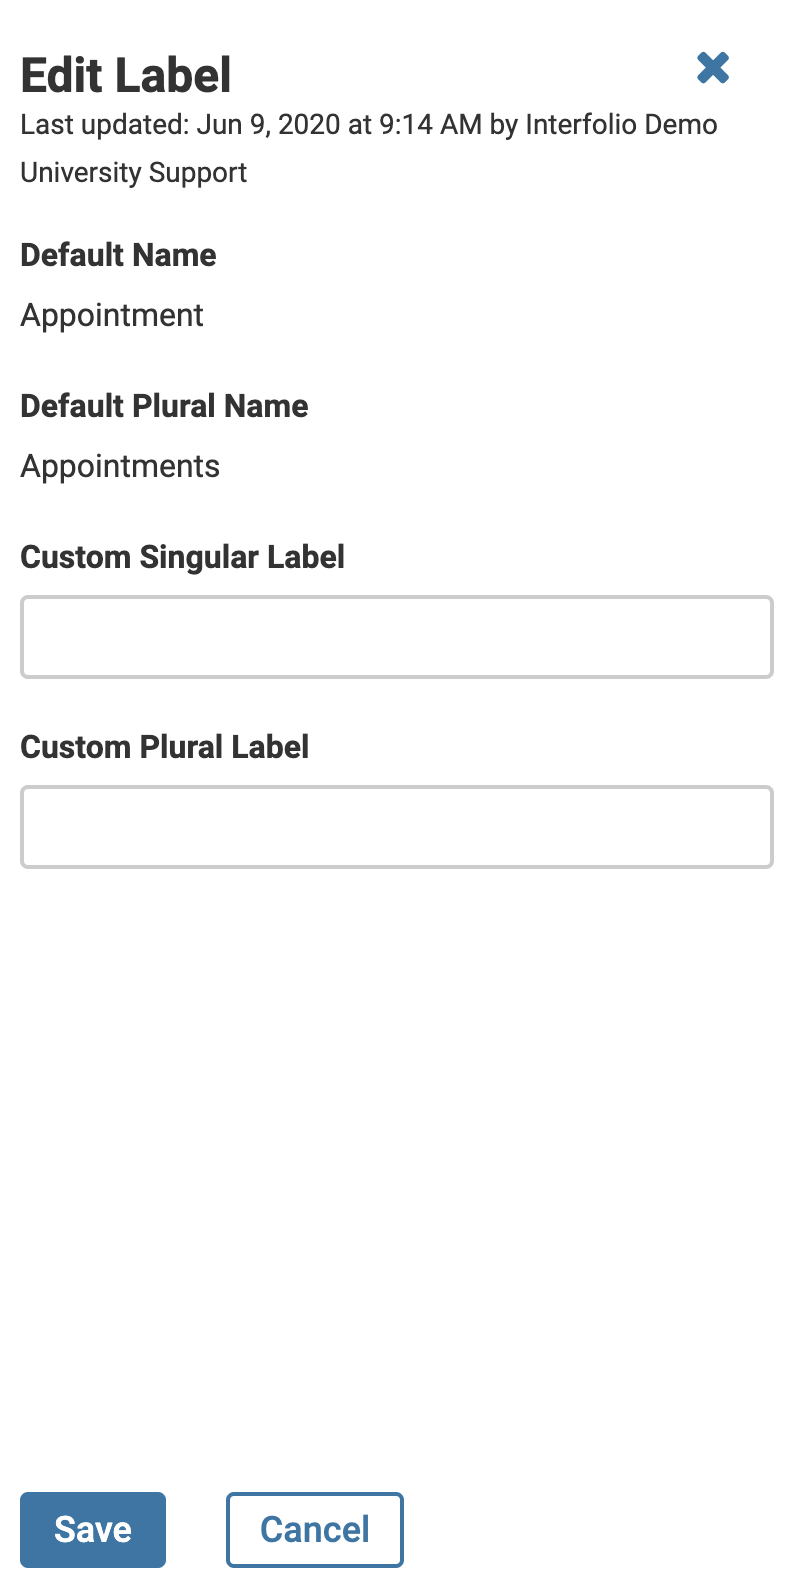 Edit Label section with Default Name and Default Plural Name listed. Custom Singular Label and Custom Plural Label fields listed below with Save button at the bottom